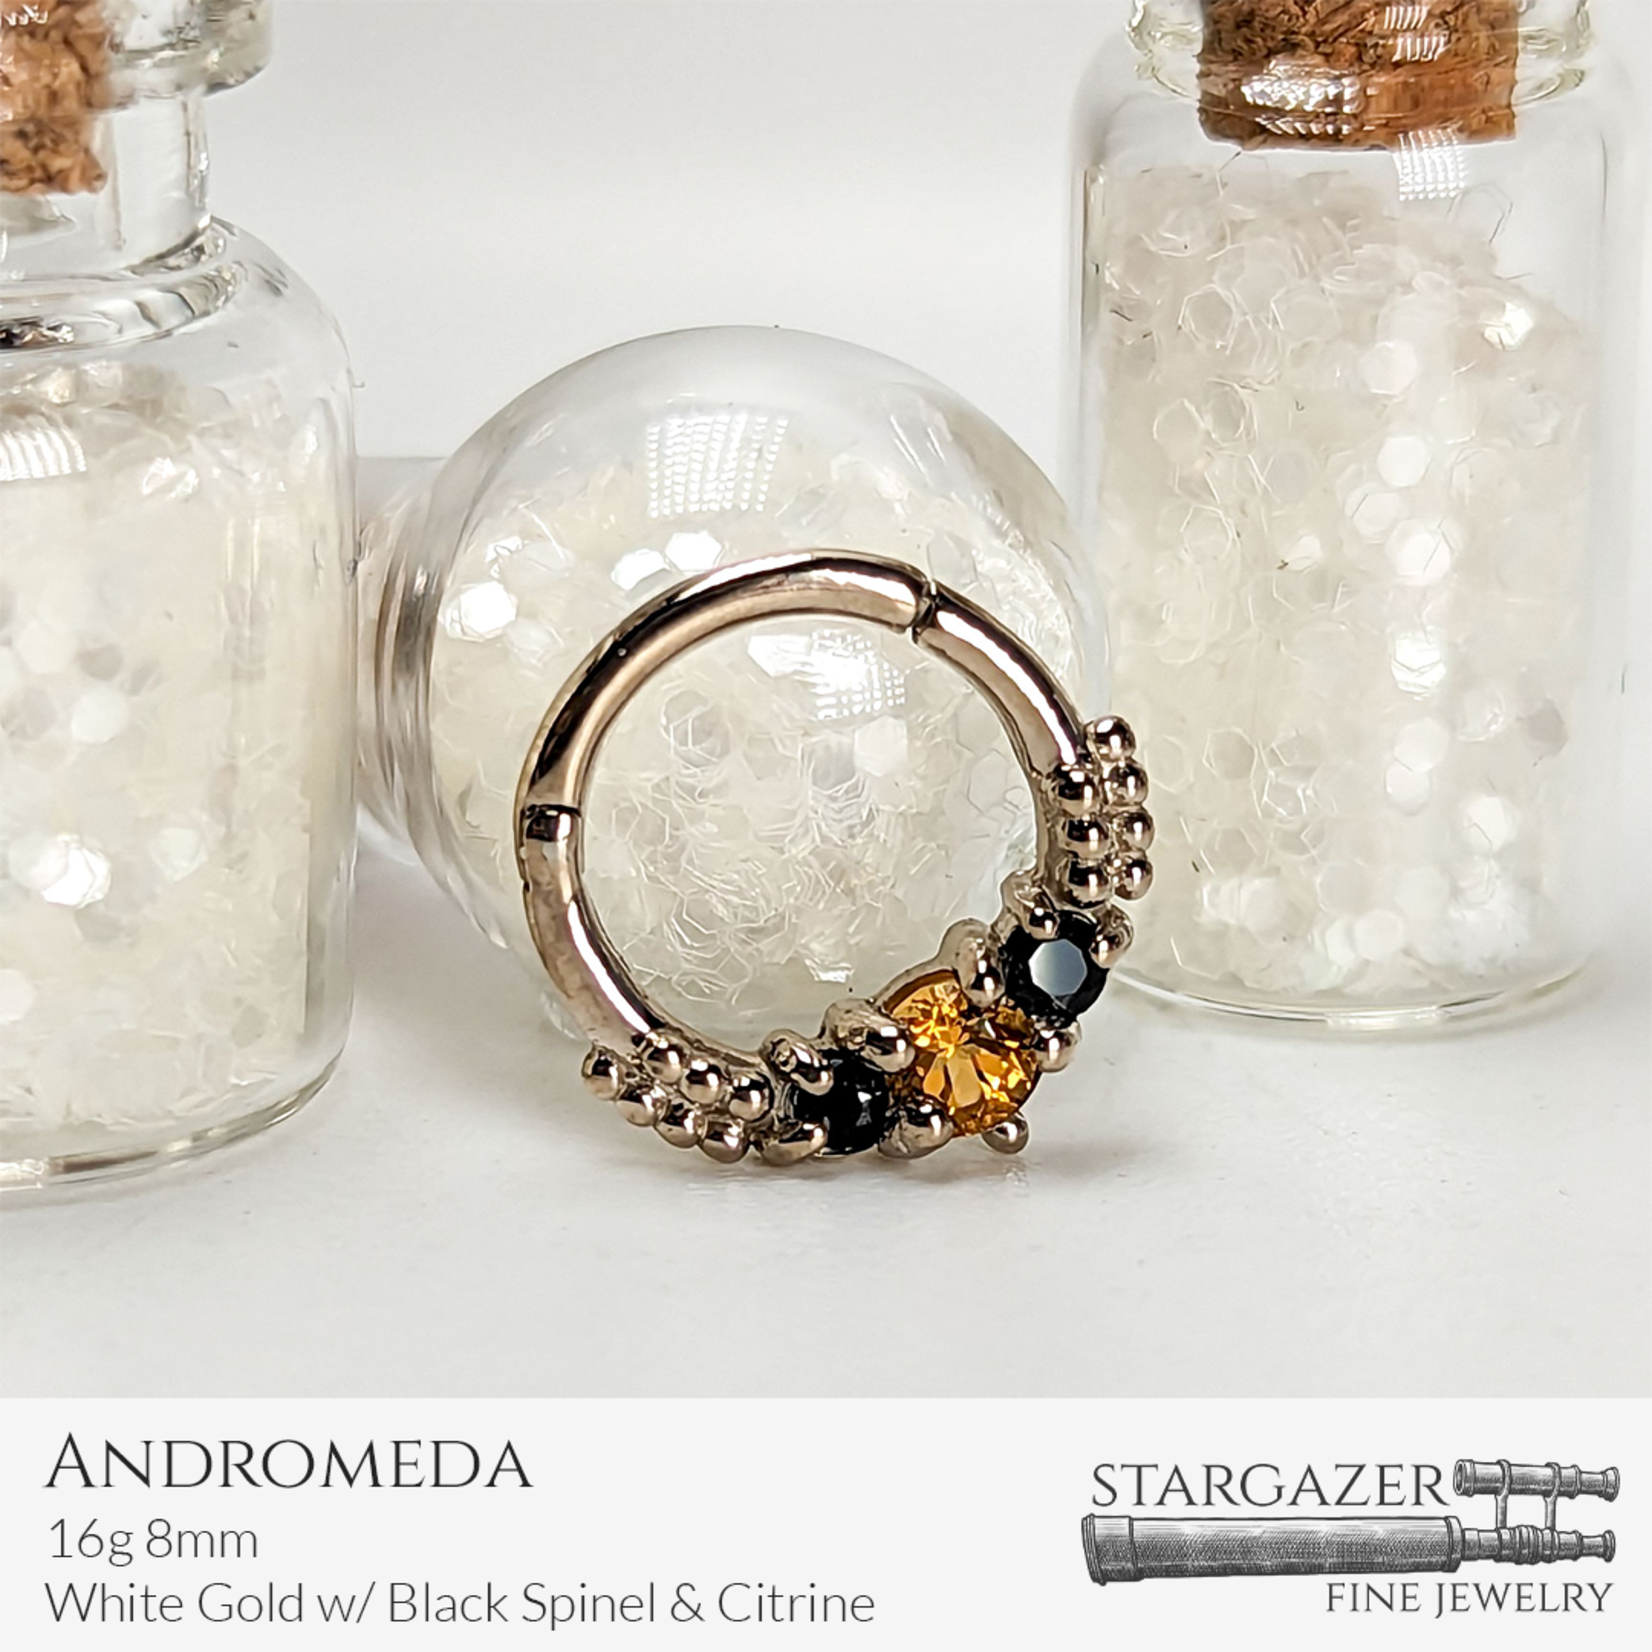 Andromeda 16g 8mm; White Gold with Citrine and Black Spinel